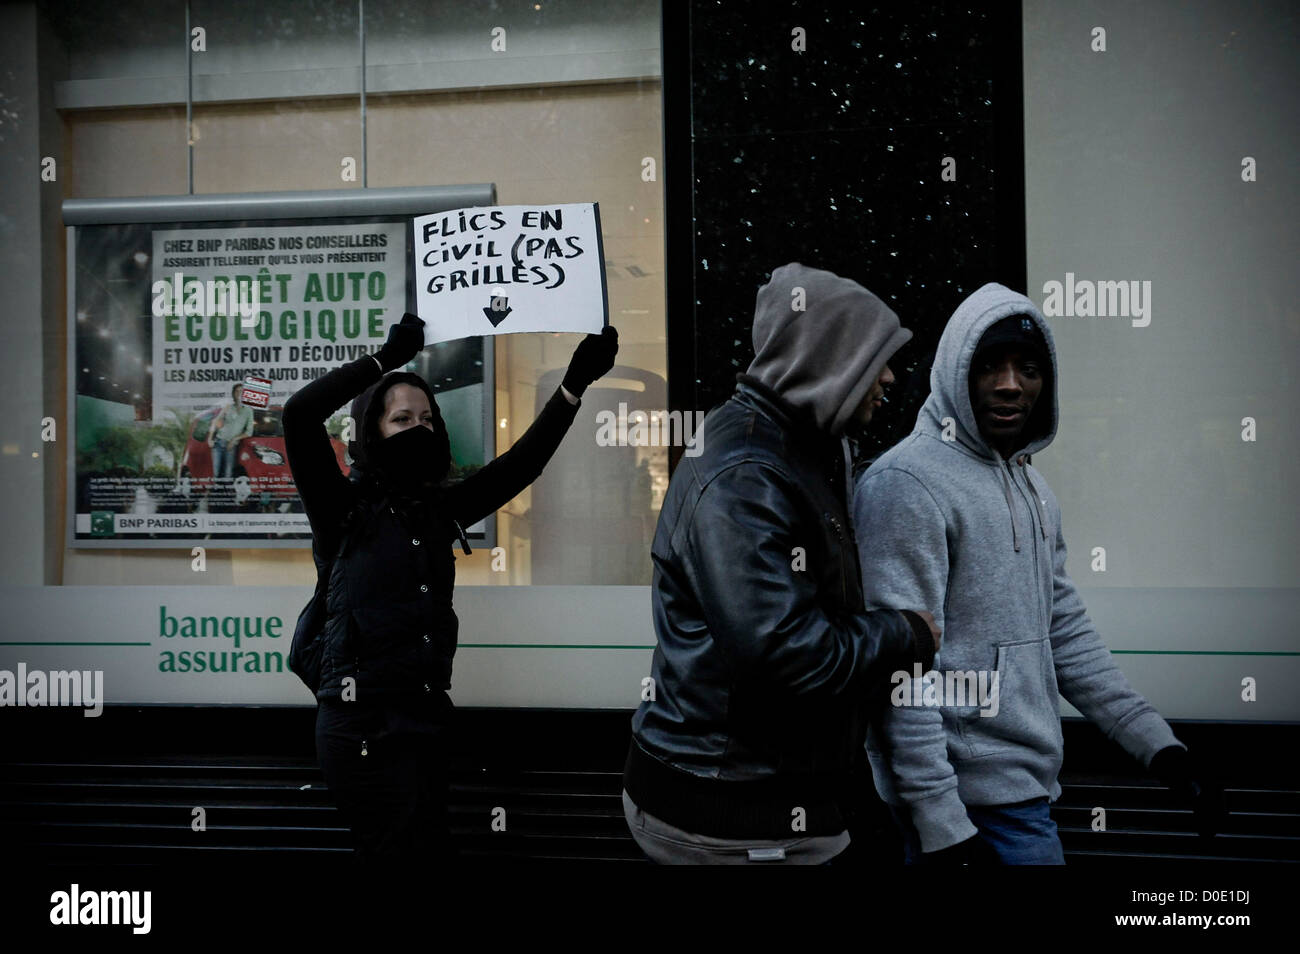 Members of the BAC reported by a protester - The mobilisation against the Government's proposed pension reforms to increase the Stock Photo